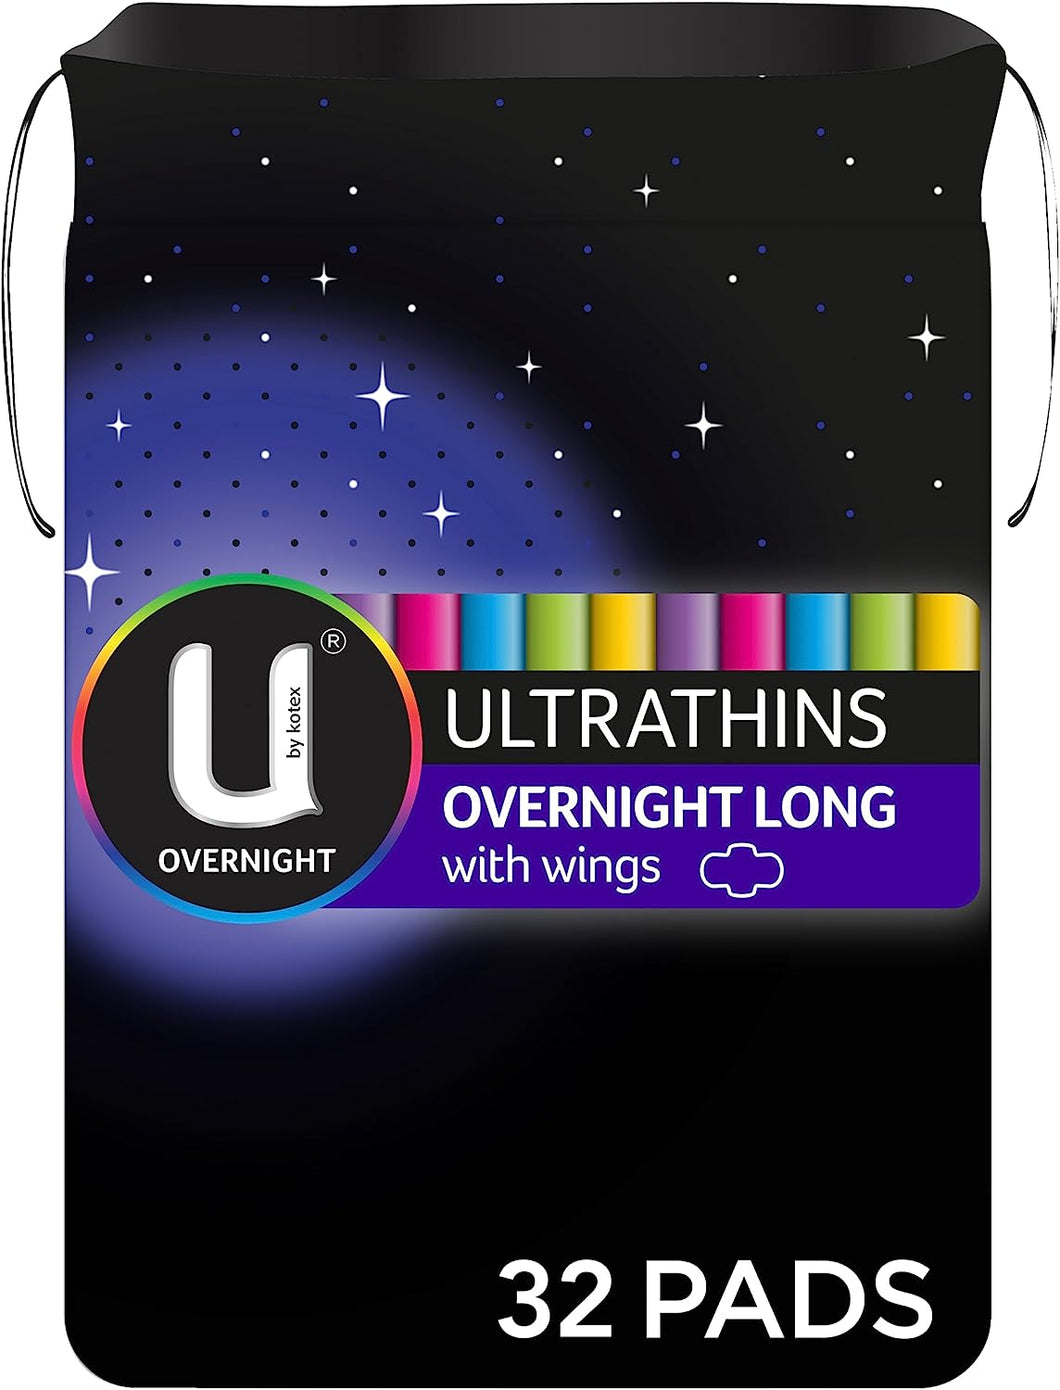 Ultrathin Overnight Pads Long with Wings 32 Count (4 X 8 Pack) - Packaging May Vary